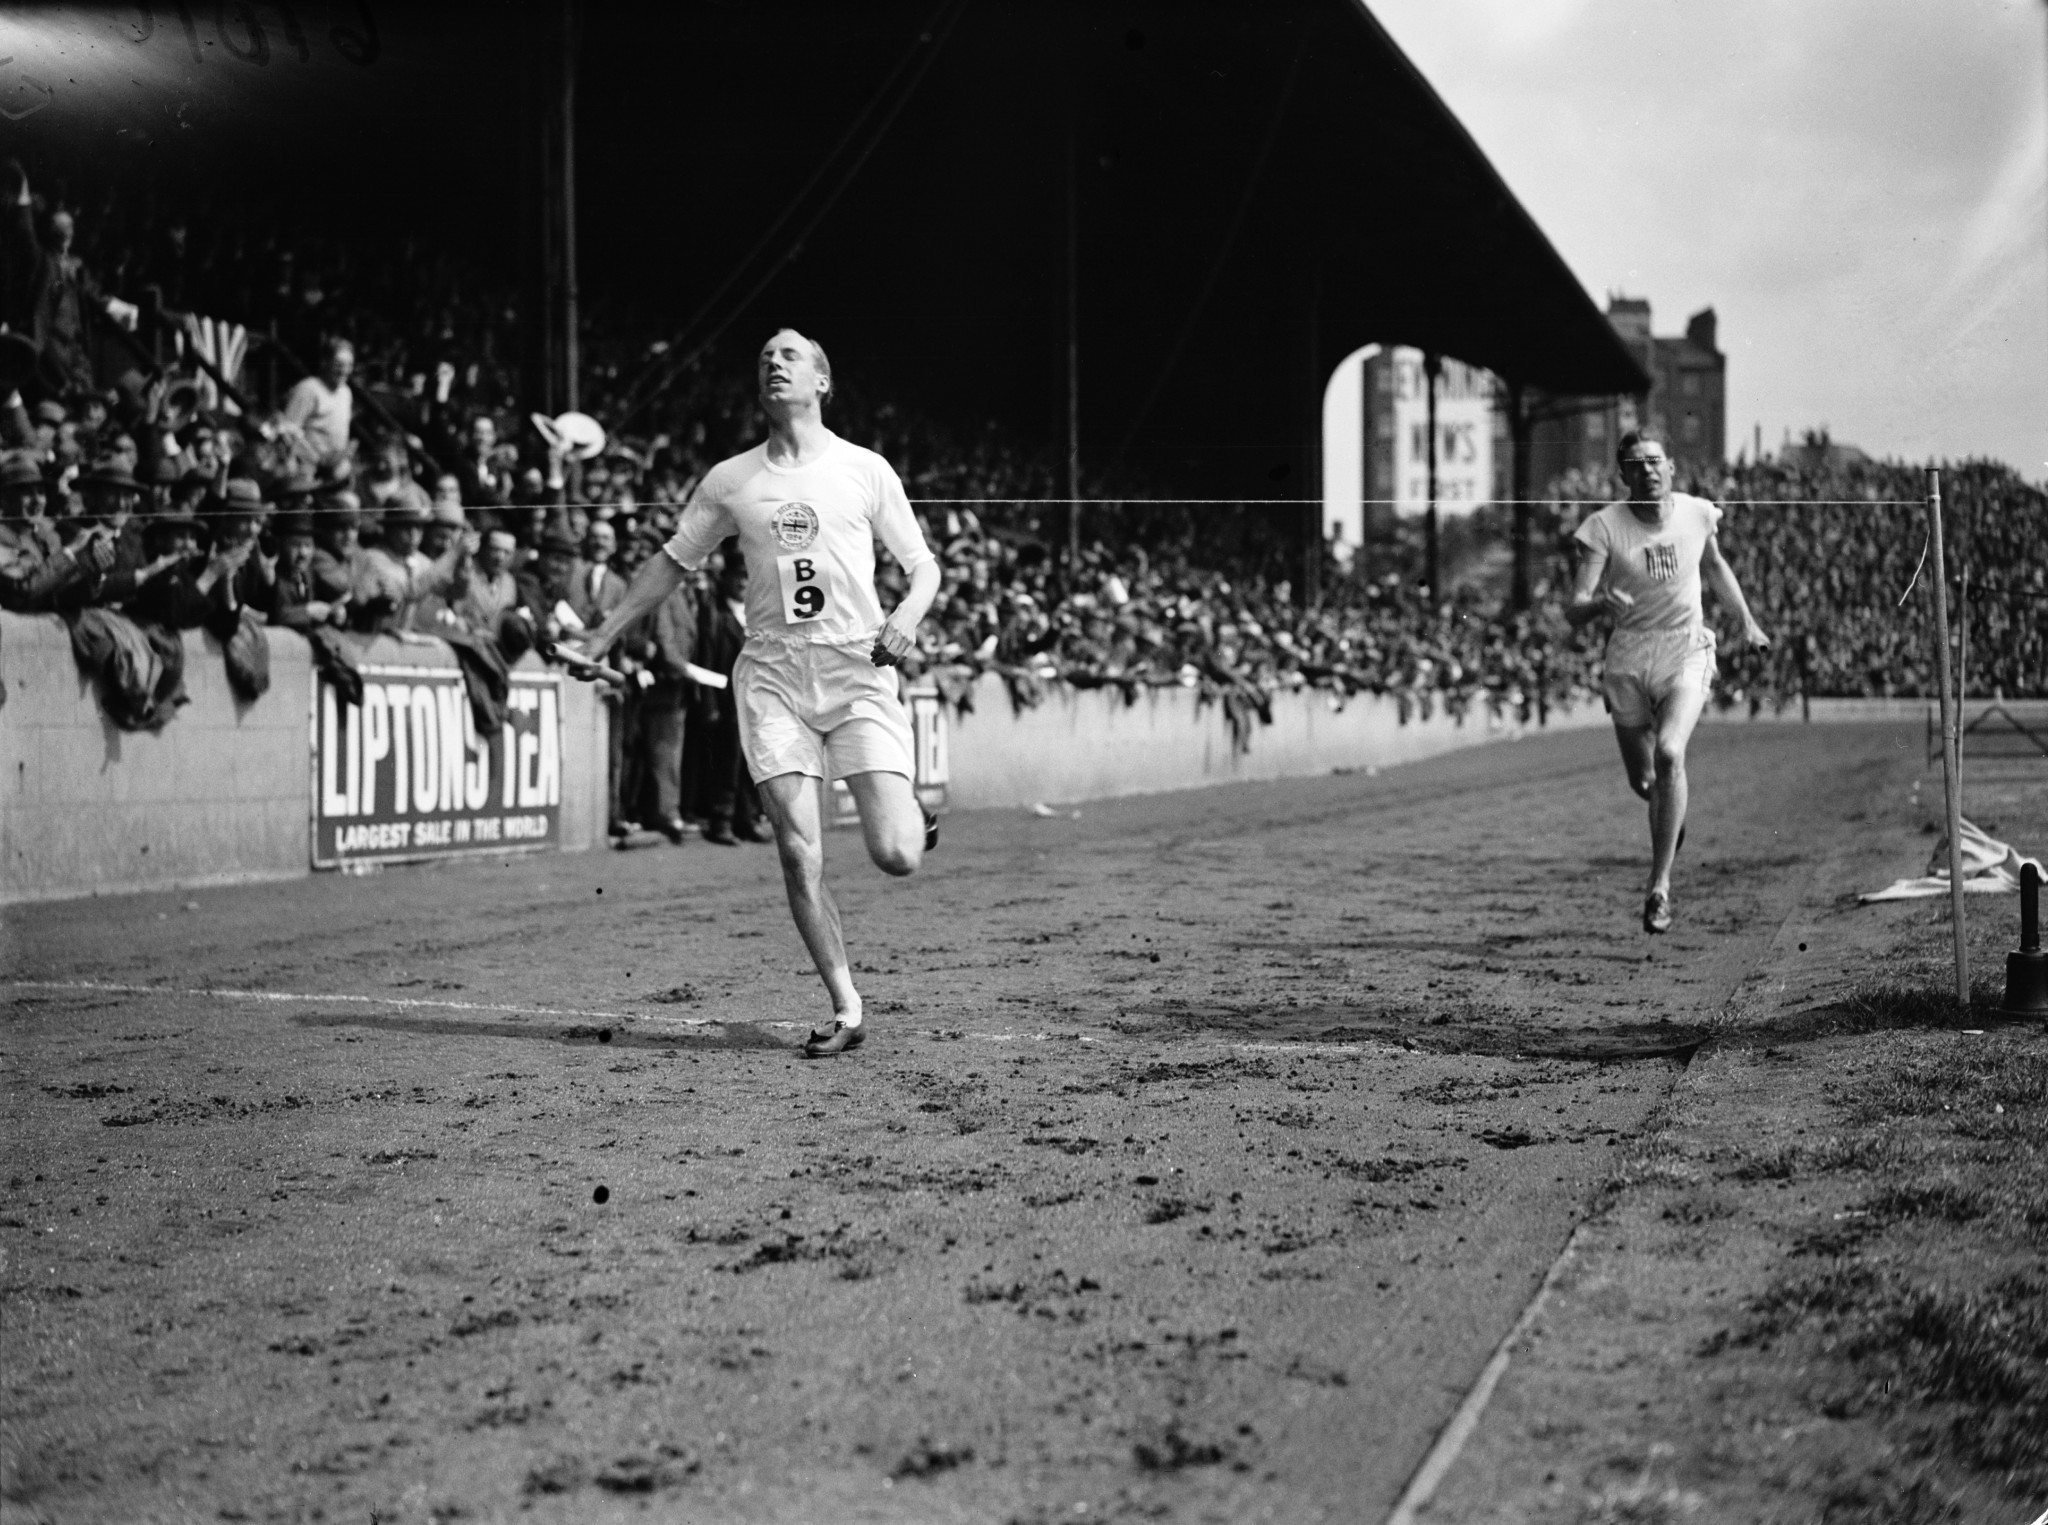 Royal approval for centenary celebrations of Chariots of Fire Liddell